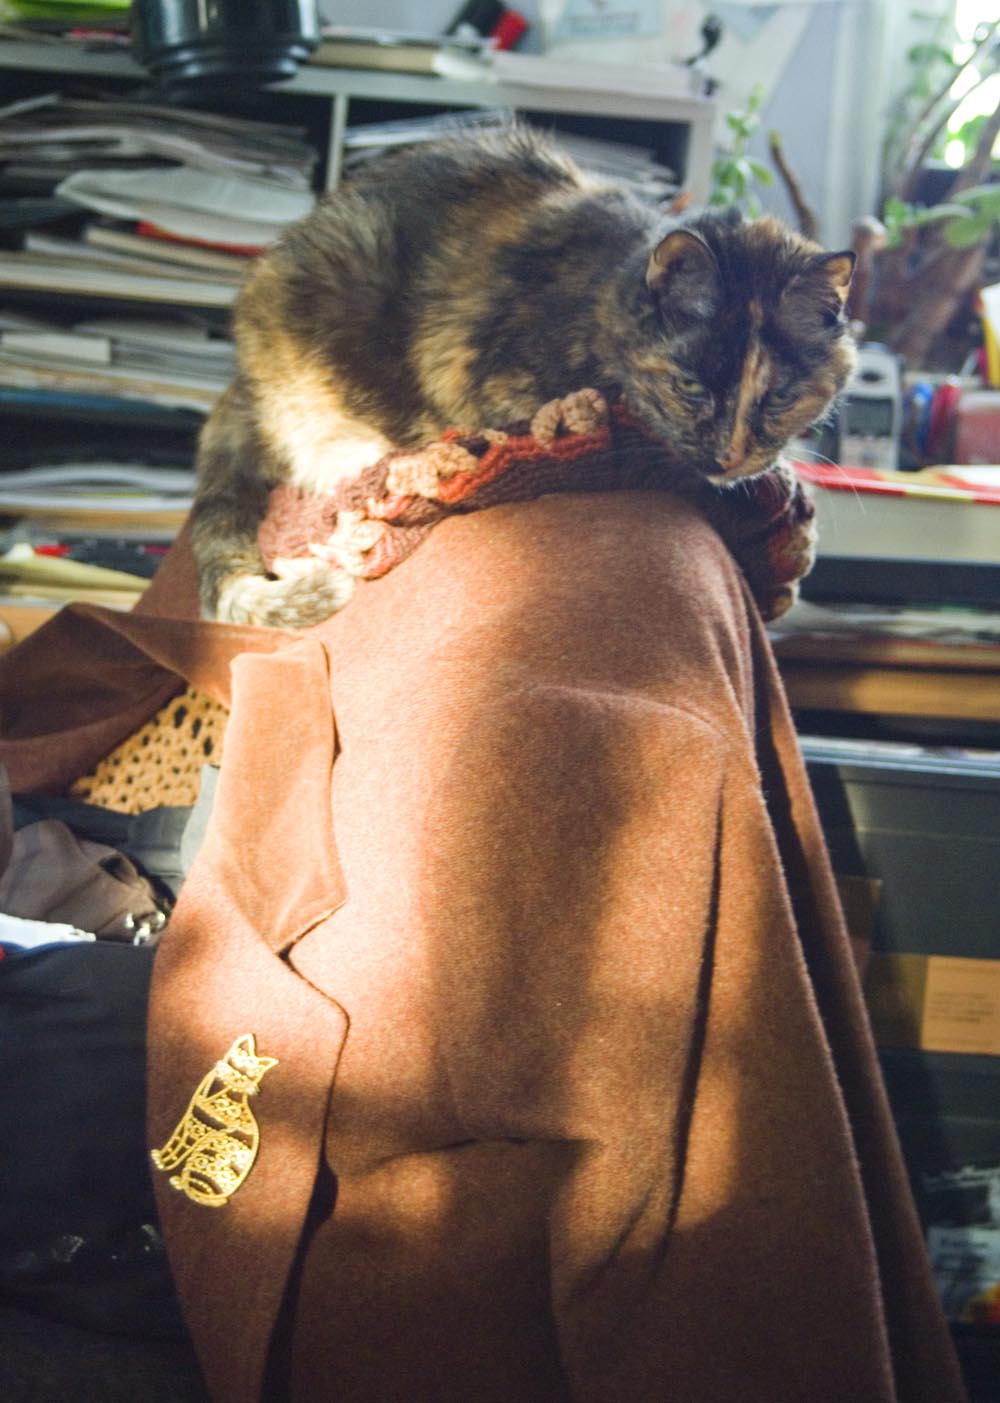 tortoiseshell cat curled up on hat on coat on chair